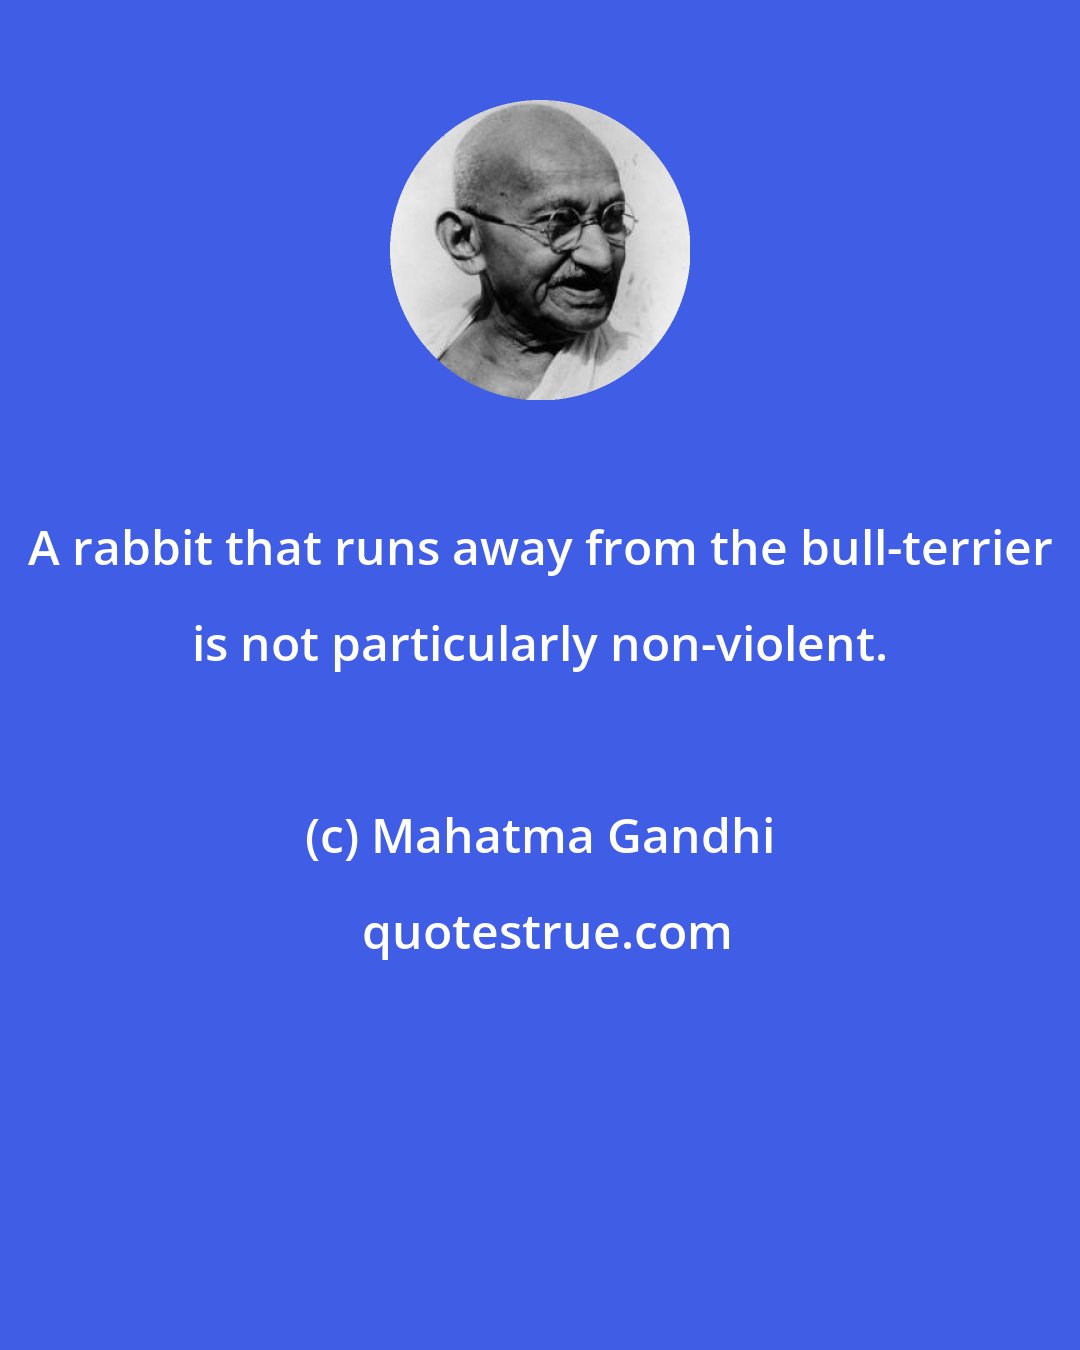 Mahatma Gandhi: A rabbit that runs away from the bull-terrier is not particularly non-violent.